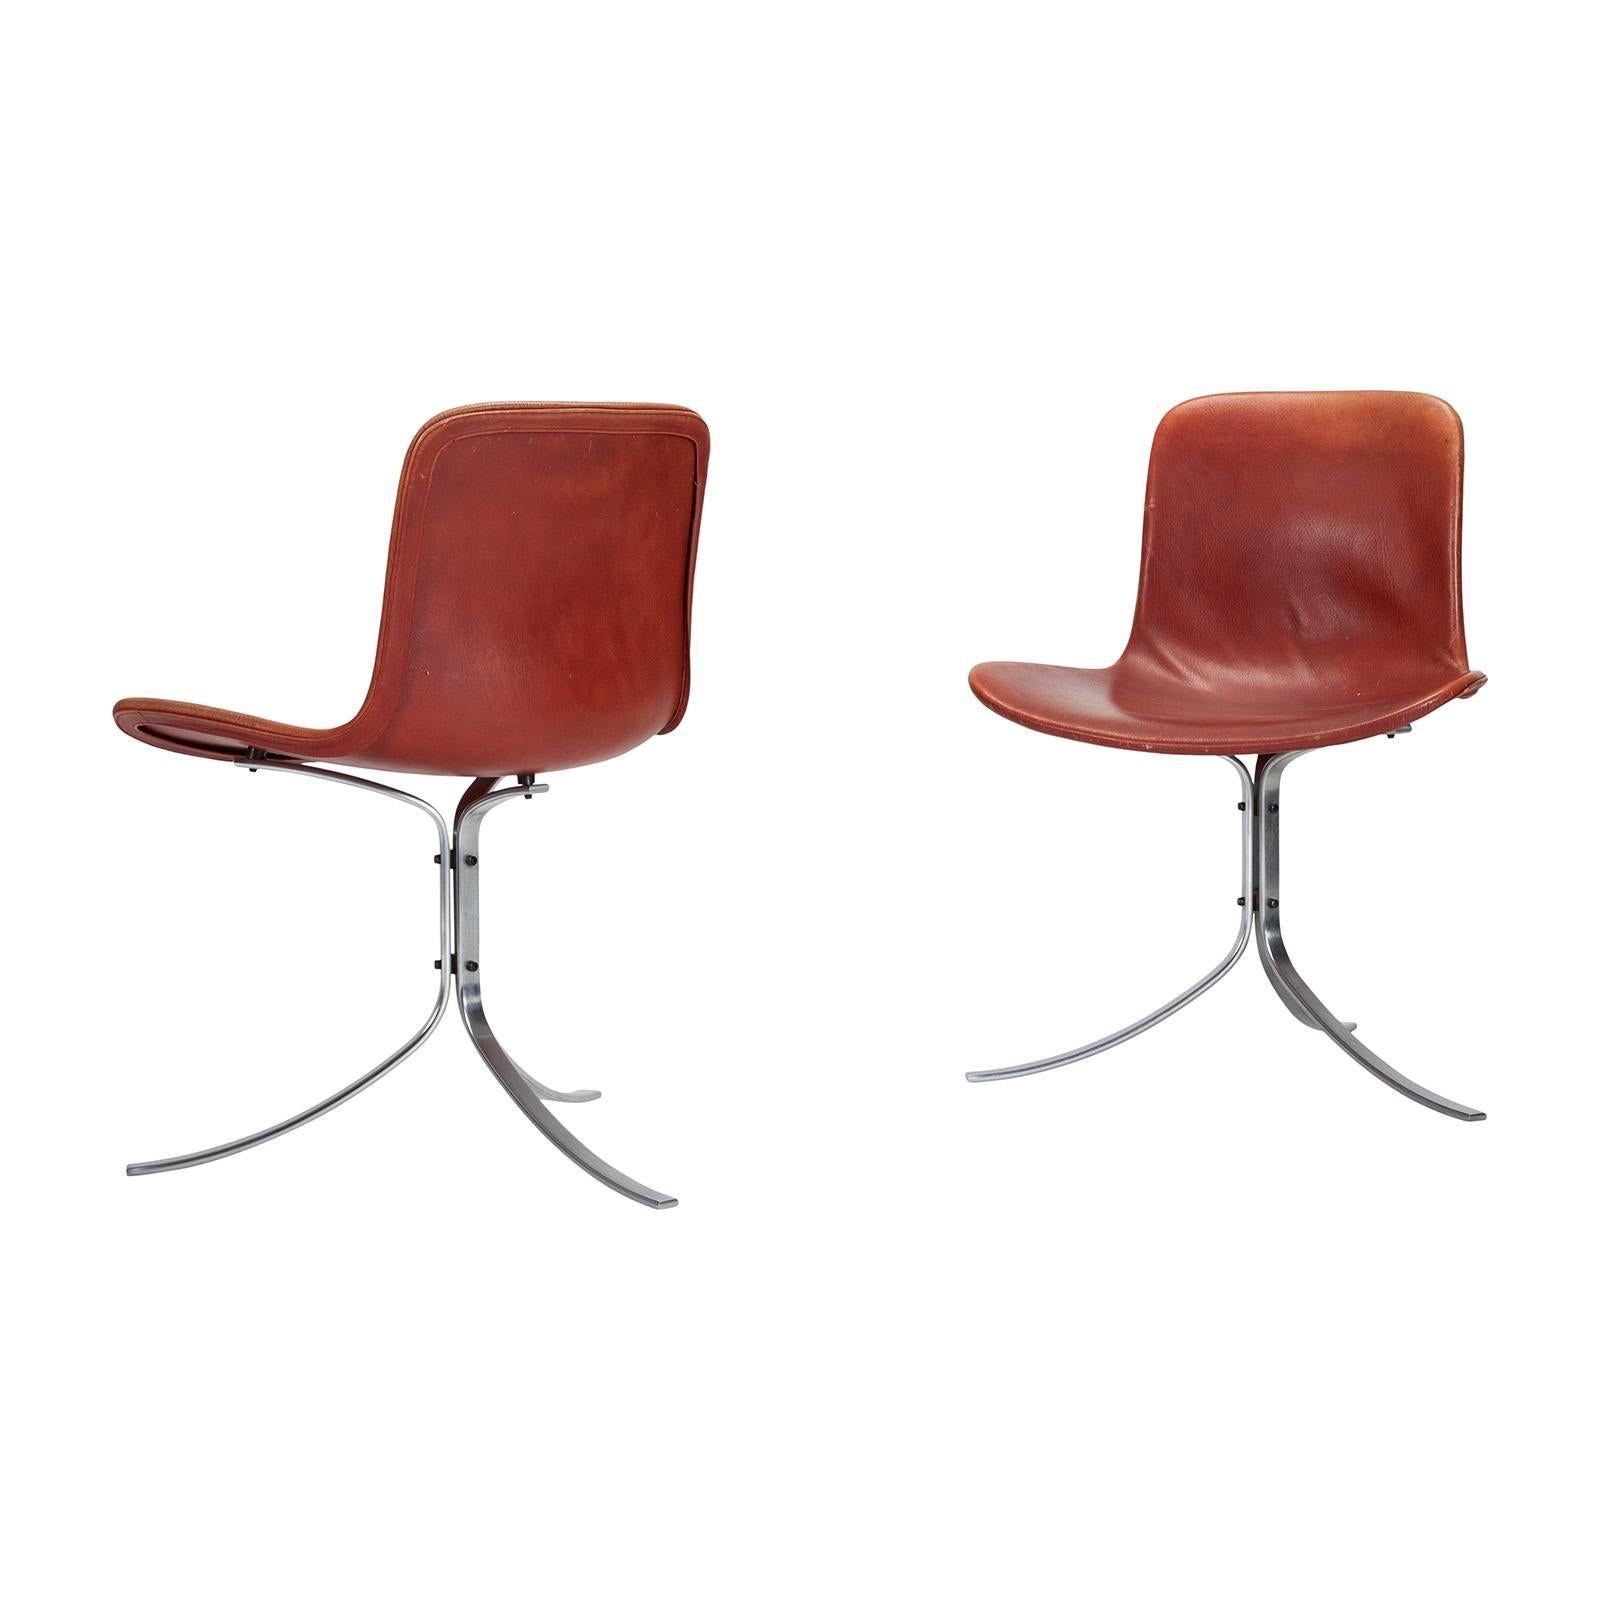 A pair of original PK 9 chairs designed by Poul Kjærholm in 1960 and manufactured by E. Kold Christensen, Denmark.
The chairs retain the original vegetable tanned reddish-brown leather which is in excellent condition and has beautiful patina. Bases